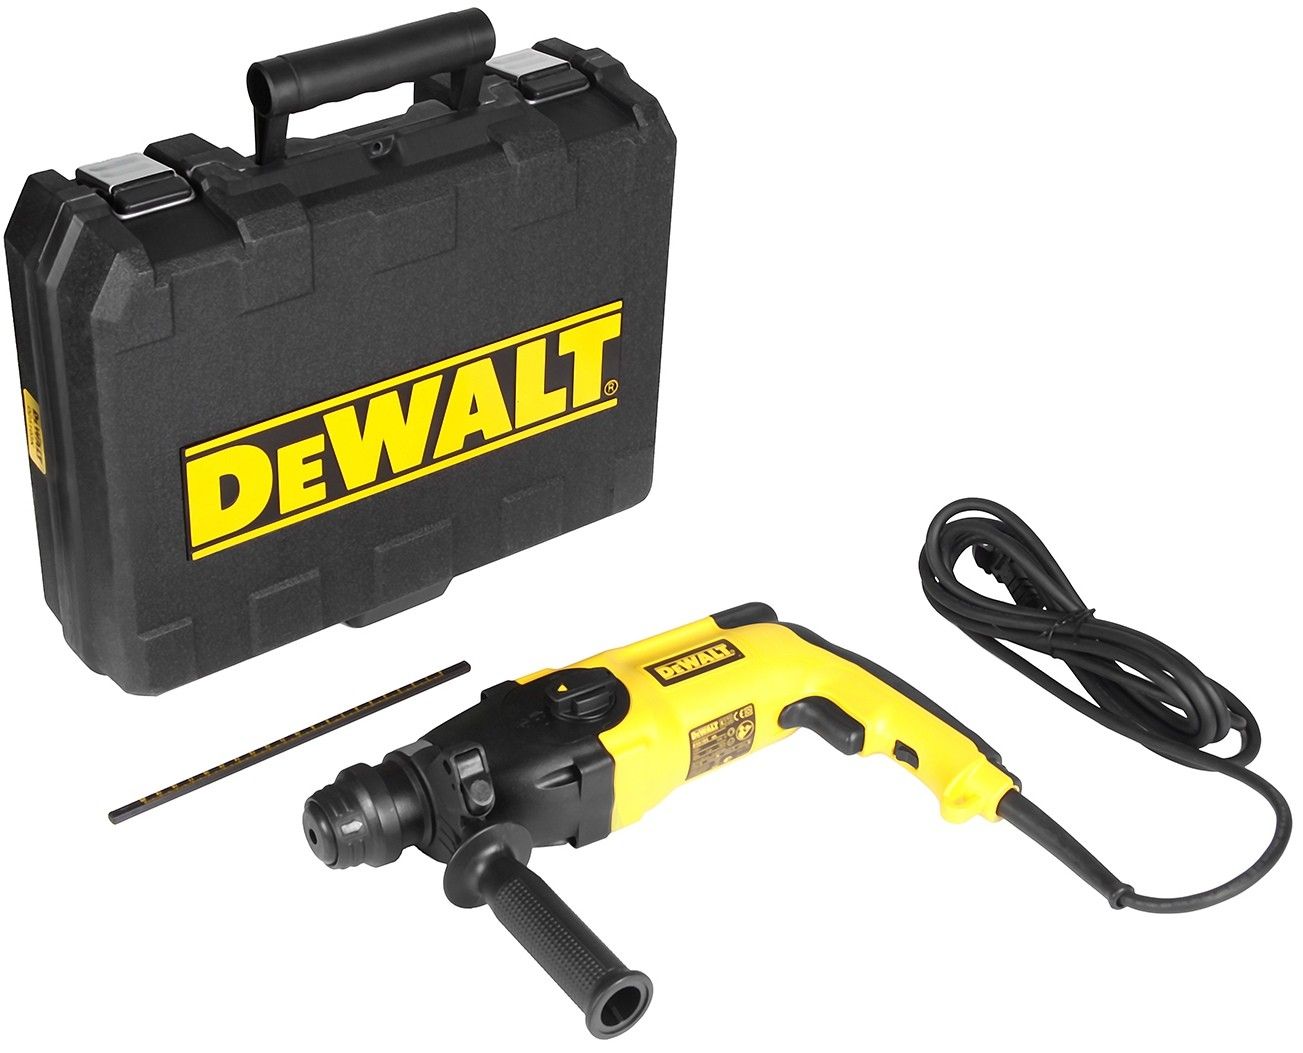 Review of the best rotary hammers from DeWALT in 2020